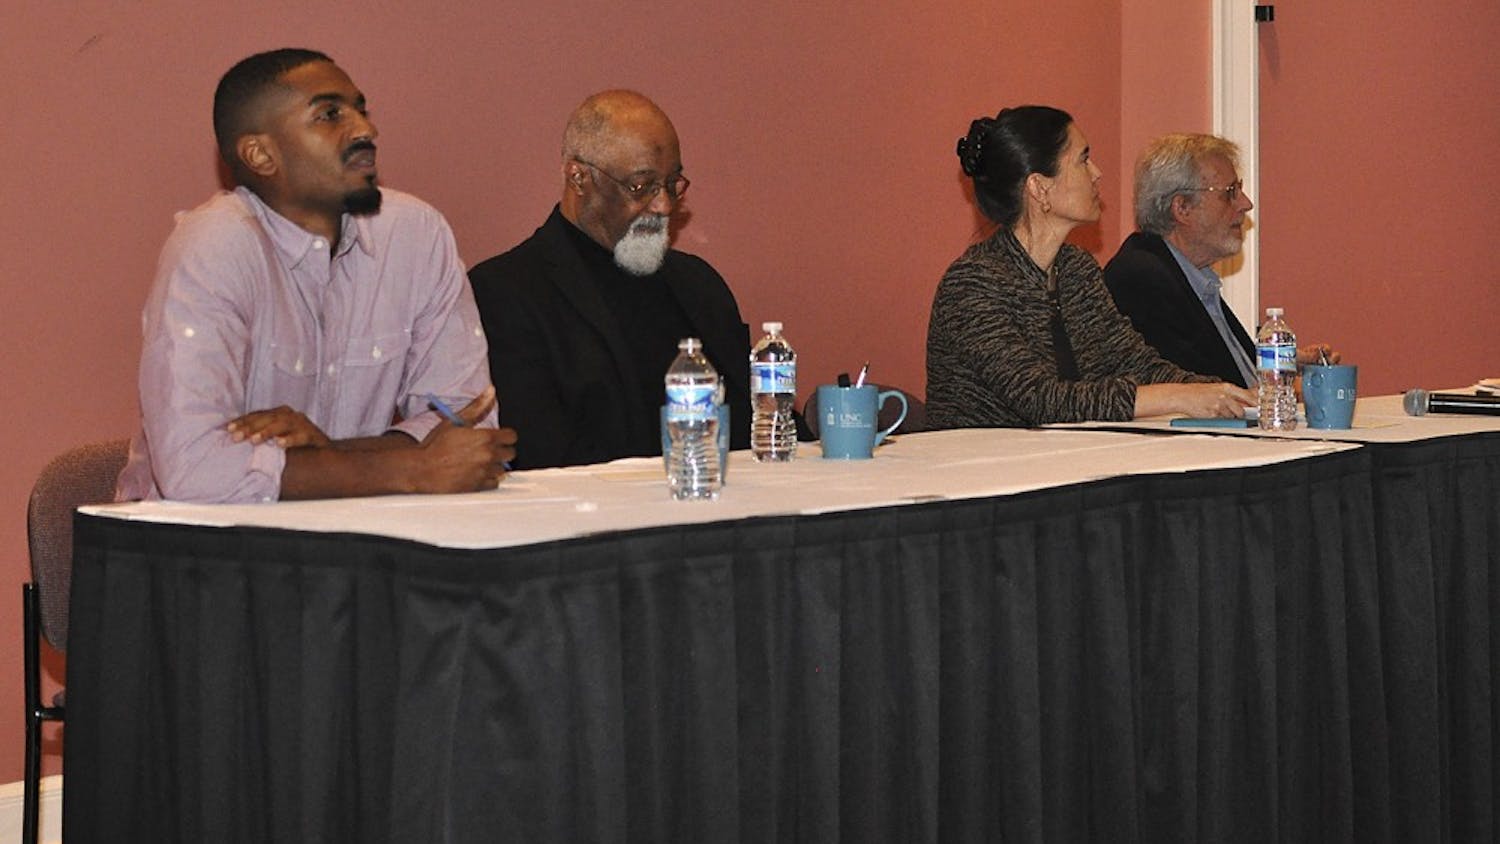 From left, Ori Burton, Irving Joyner, Anita Earls and Al McSurely participated in Thursday night's 50 Years After the Dream: Race and the Justice System Panel.